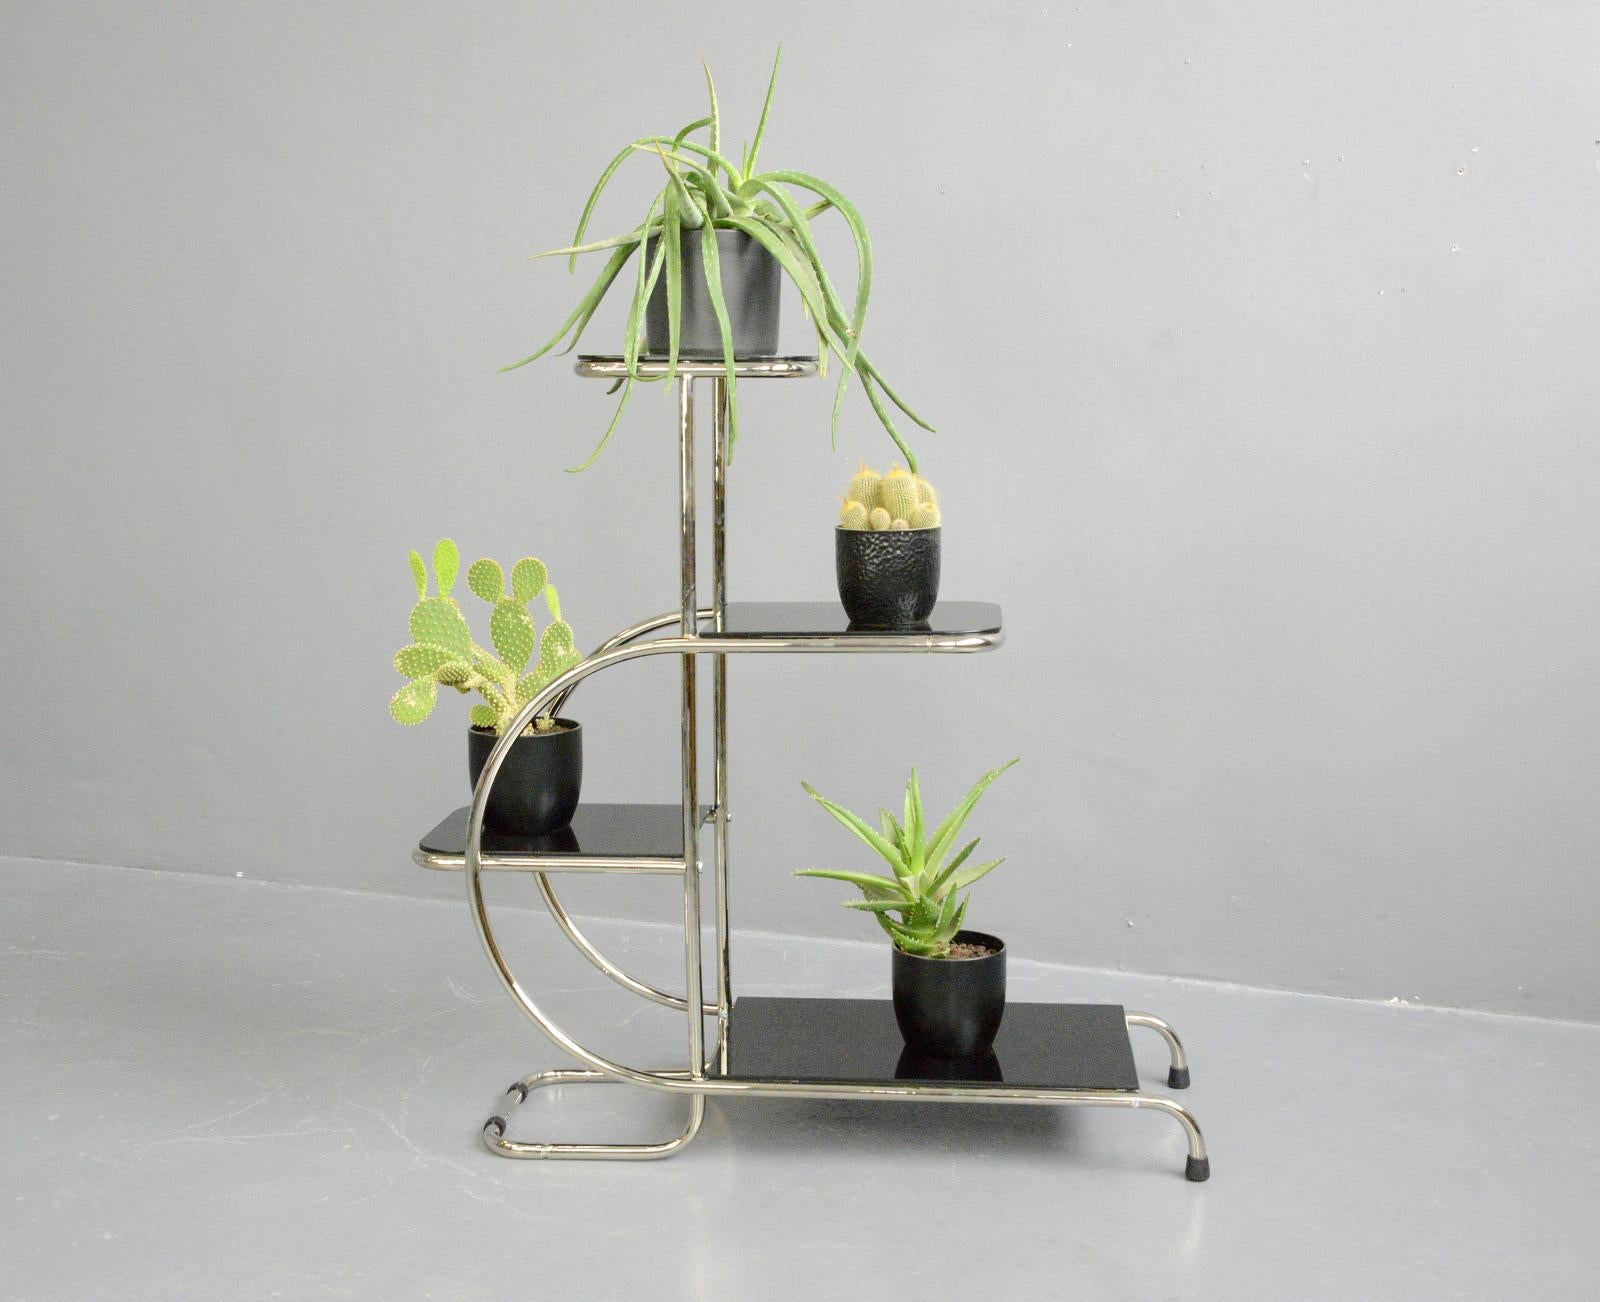 Bauhaus plant stand by Emile Guyot For Thonet, Circa 1930s

- Chromed tubular steel
- Cantilever design
- Toughened black glass shelves
- Designed by Emile Guyot
- Produced by Thonet
- Czech ~ 1930s
- 92cm long x 34cm deep x 100cm